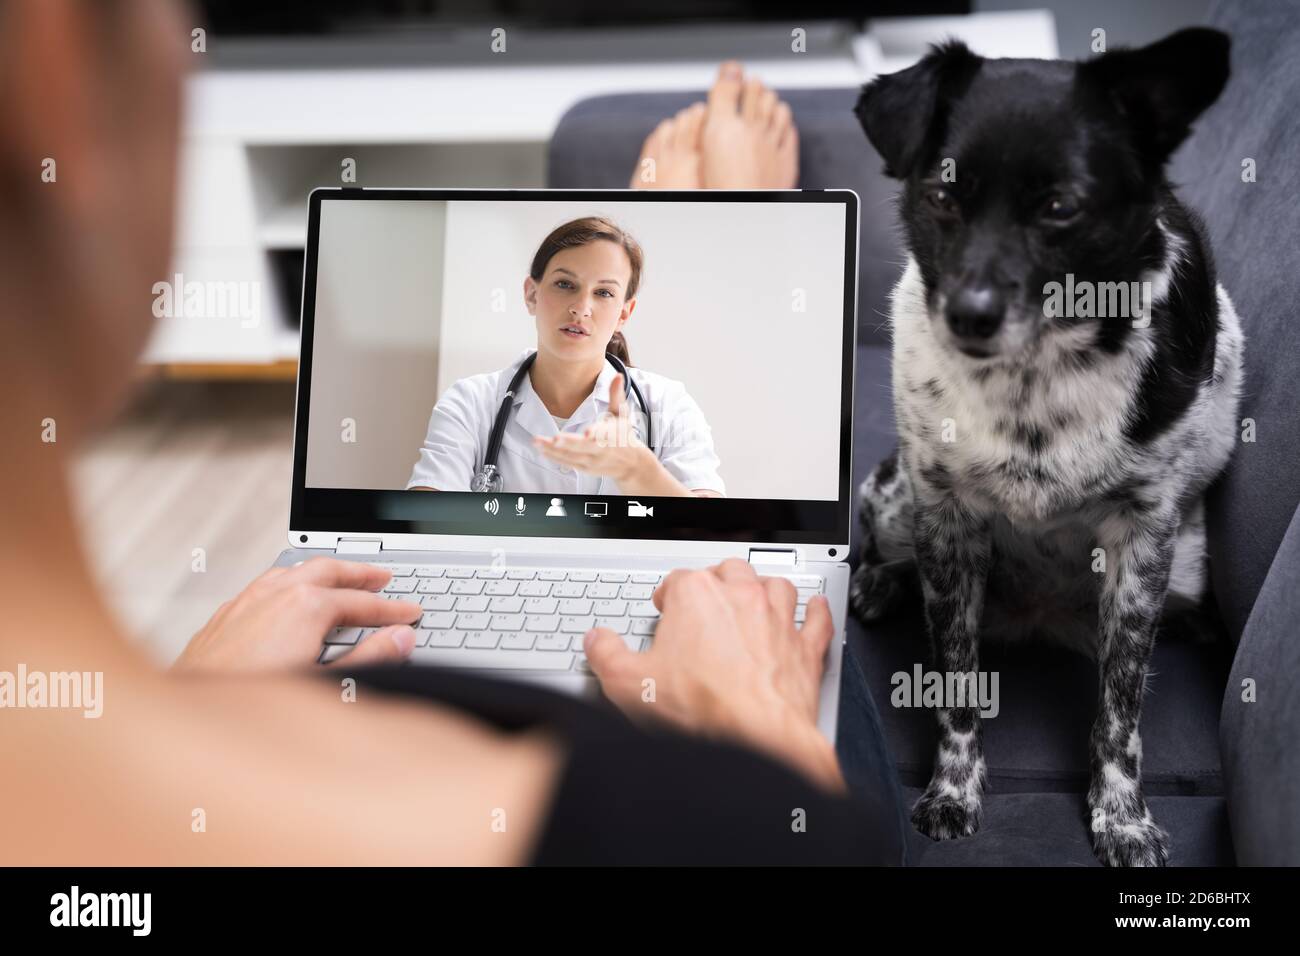 Web Video Conference Call With Doctor On Laptop Computer Stock Photo